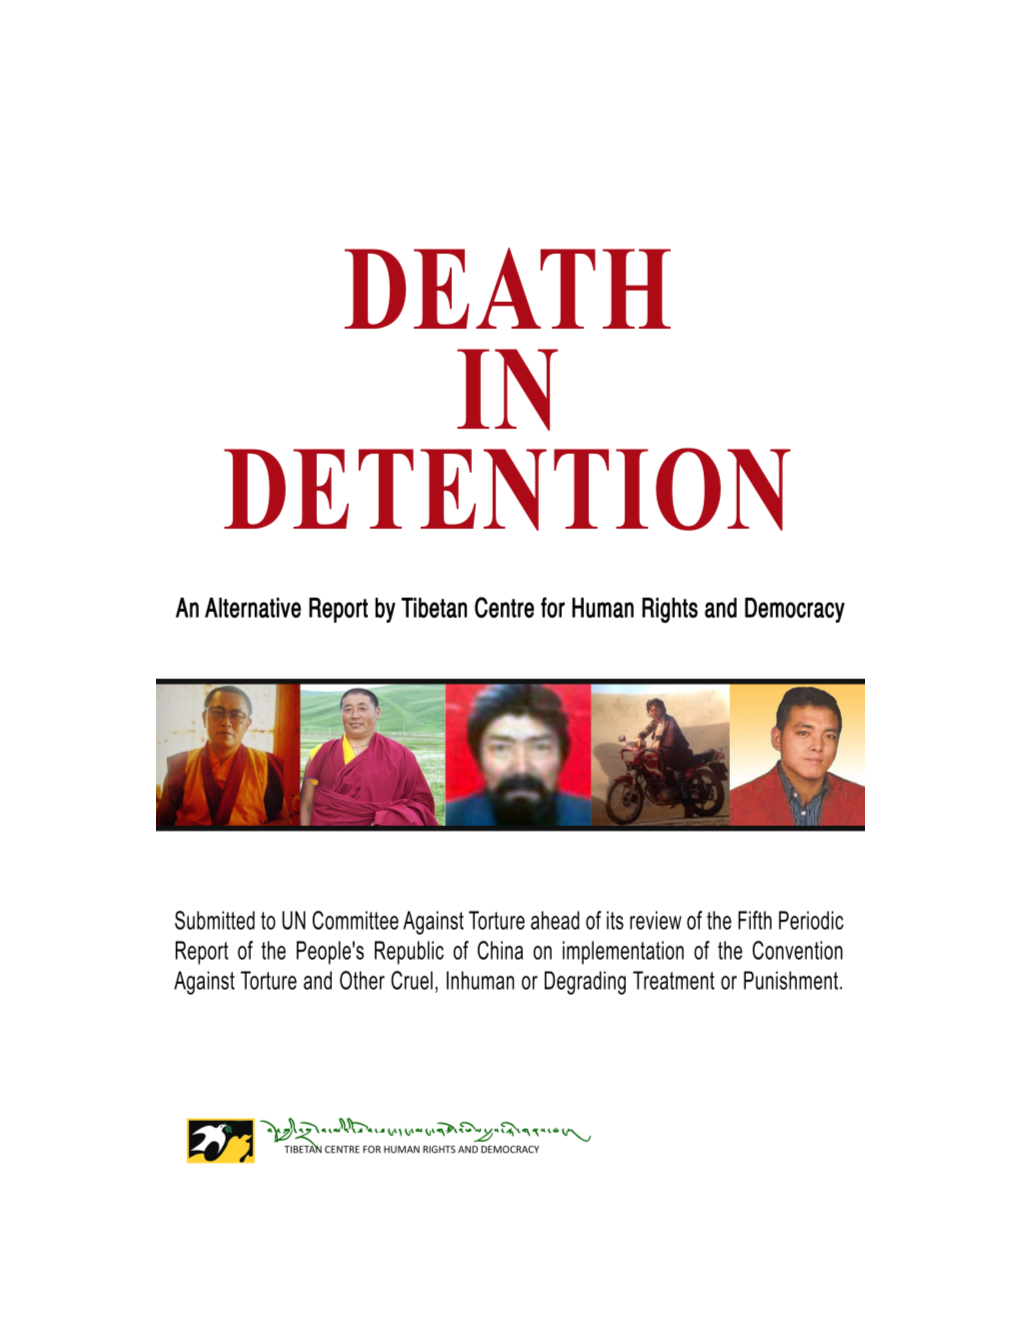 Death in Detention Create a Culture of Impunity and Make It Impossible to Know the Exact Number of Cases